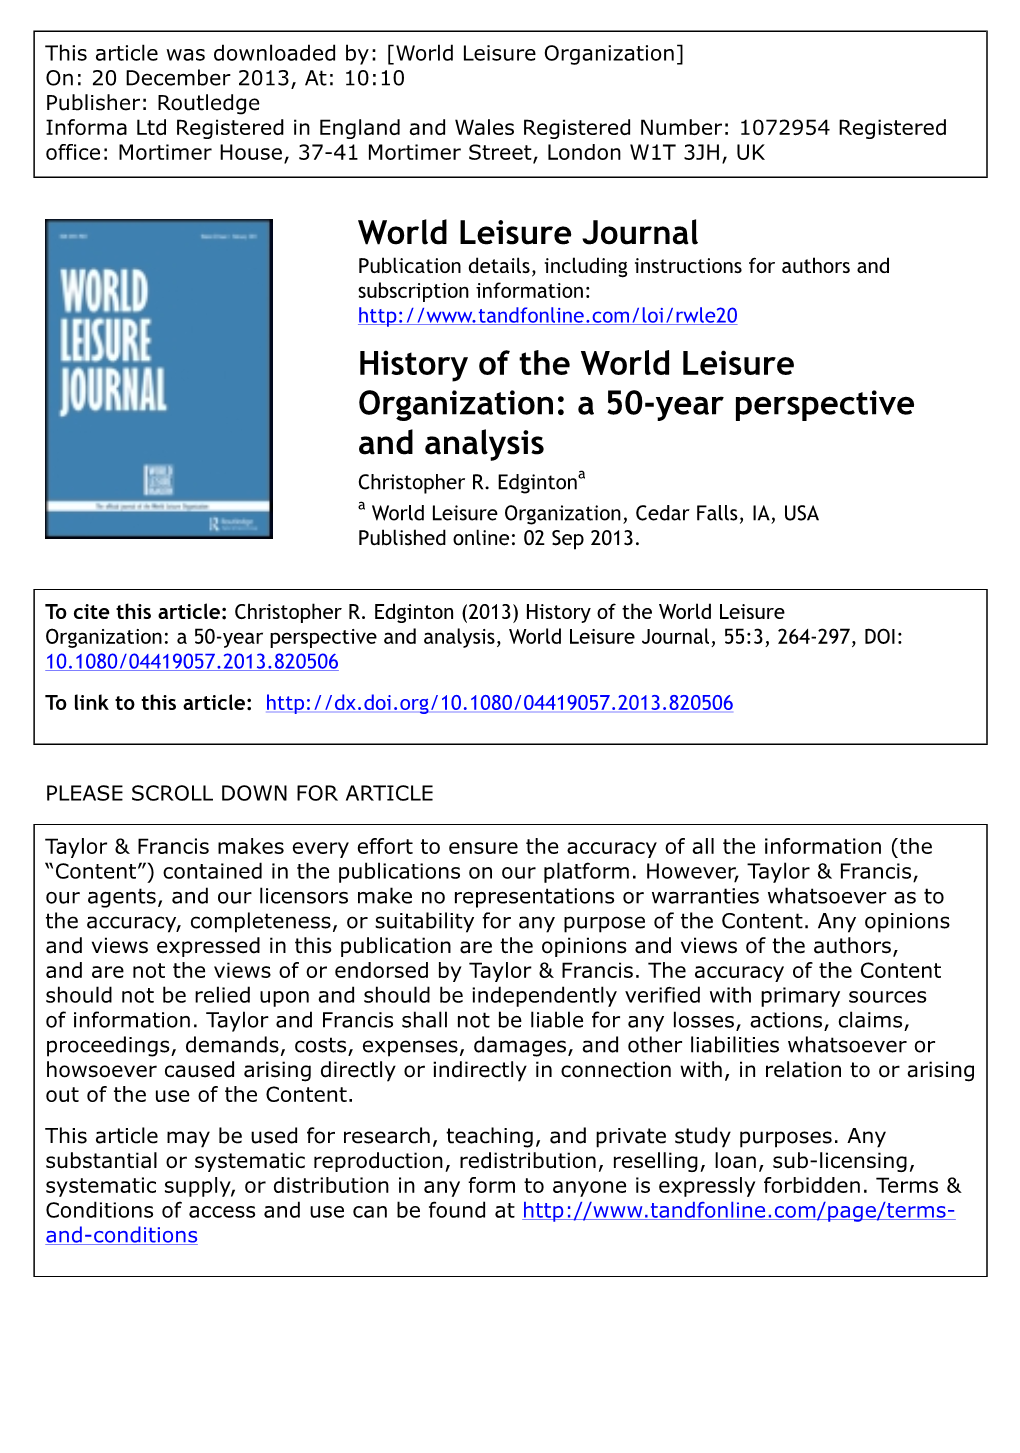 History of the World Leisure Organization: a 50-Year Perspective and Analysis Christopher R